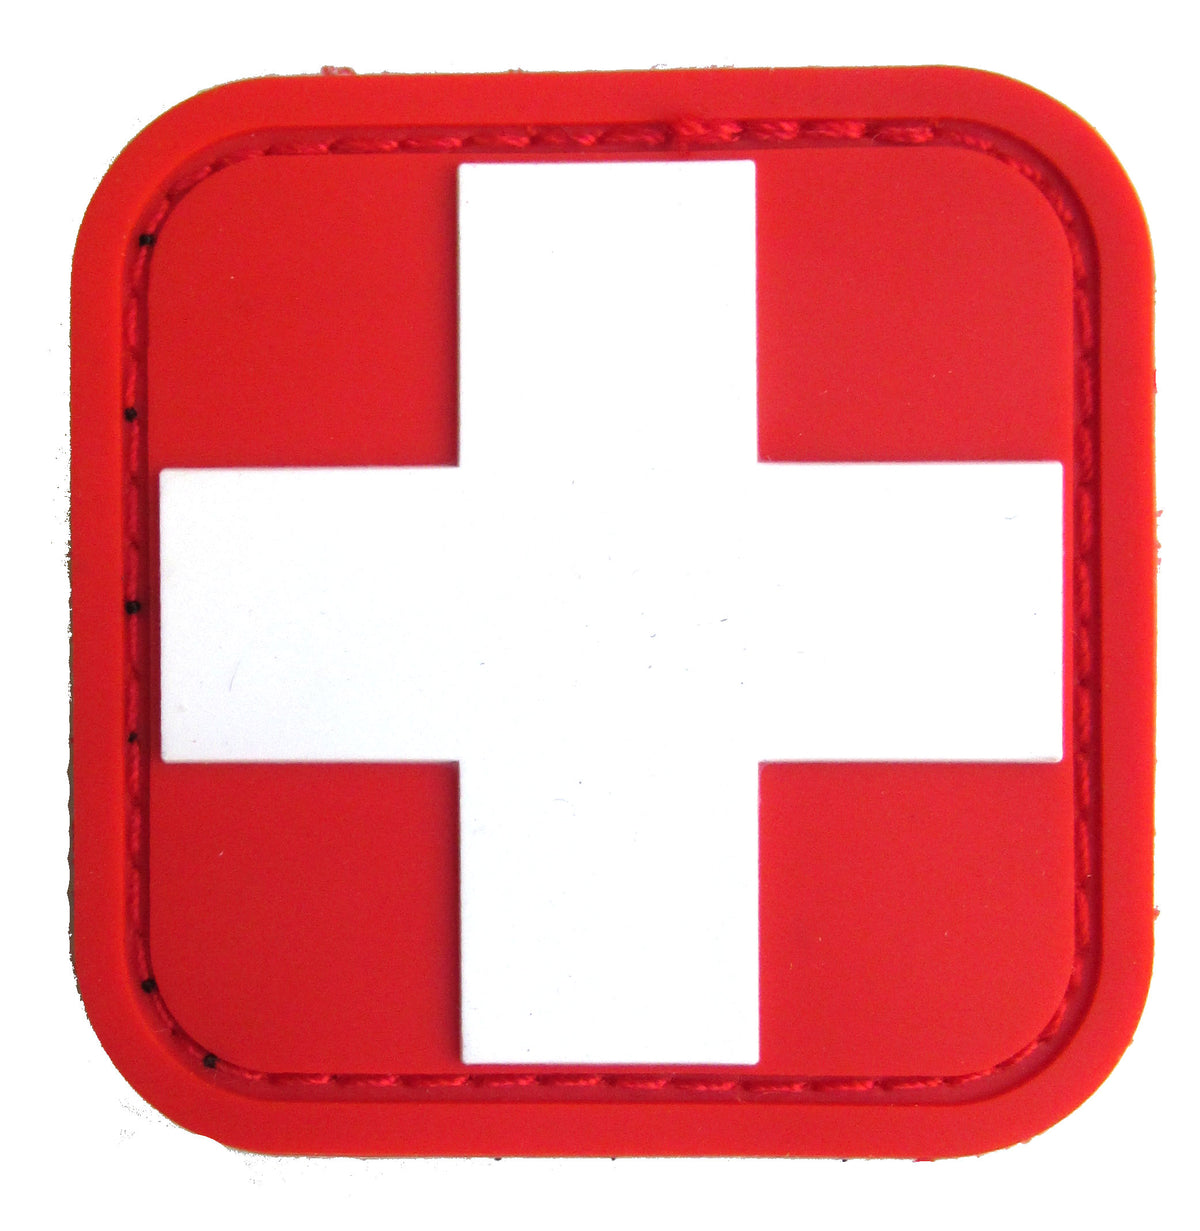 Medic Square Patch - PVC with Hook Fastener